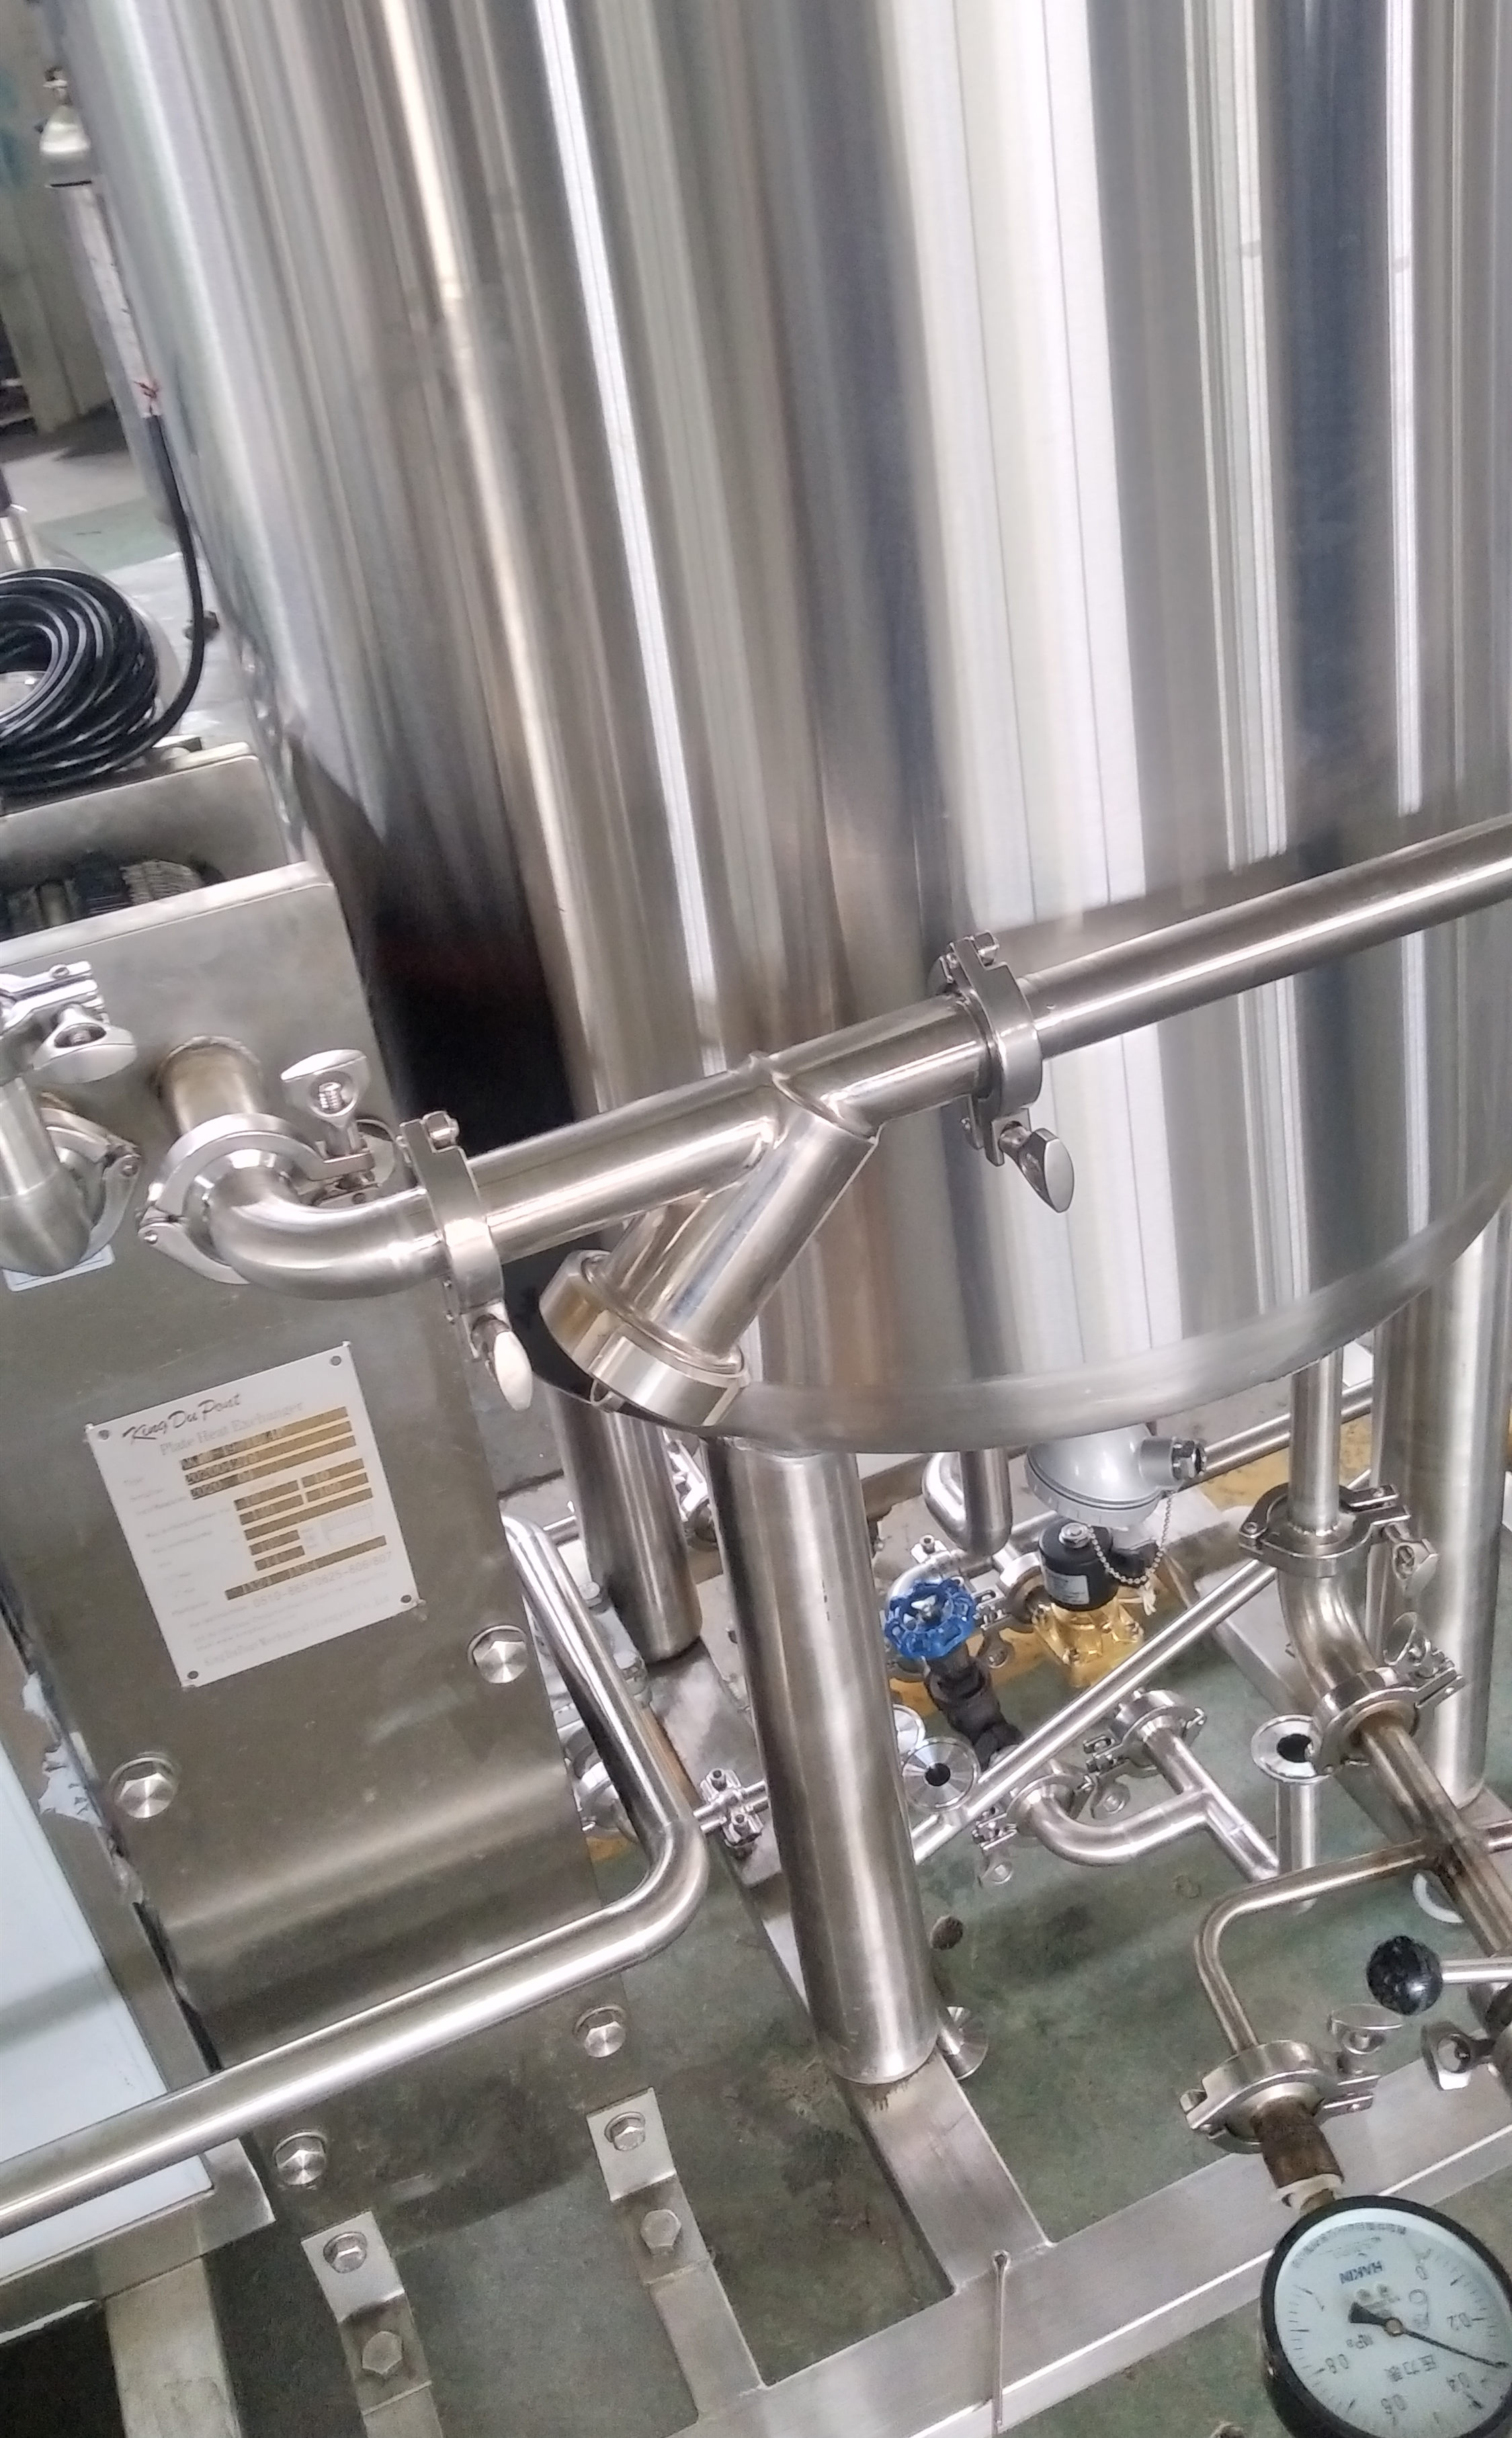 100L Stainless steel Hot sell in South Korea small size beer brewery equipment Chinese manufacturer Z1